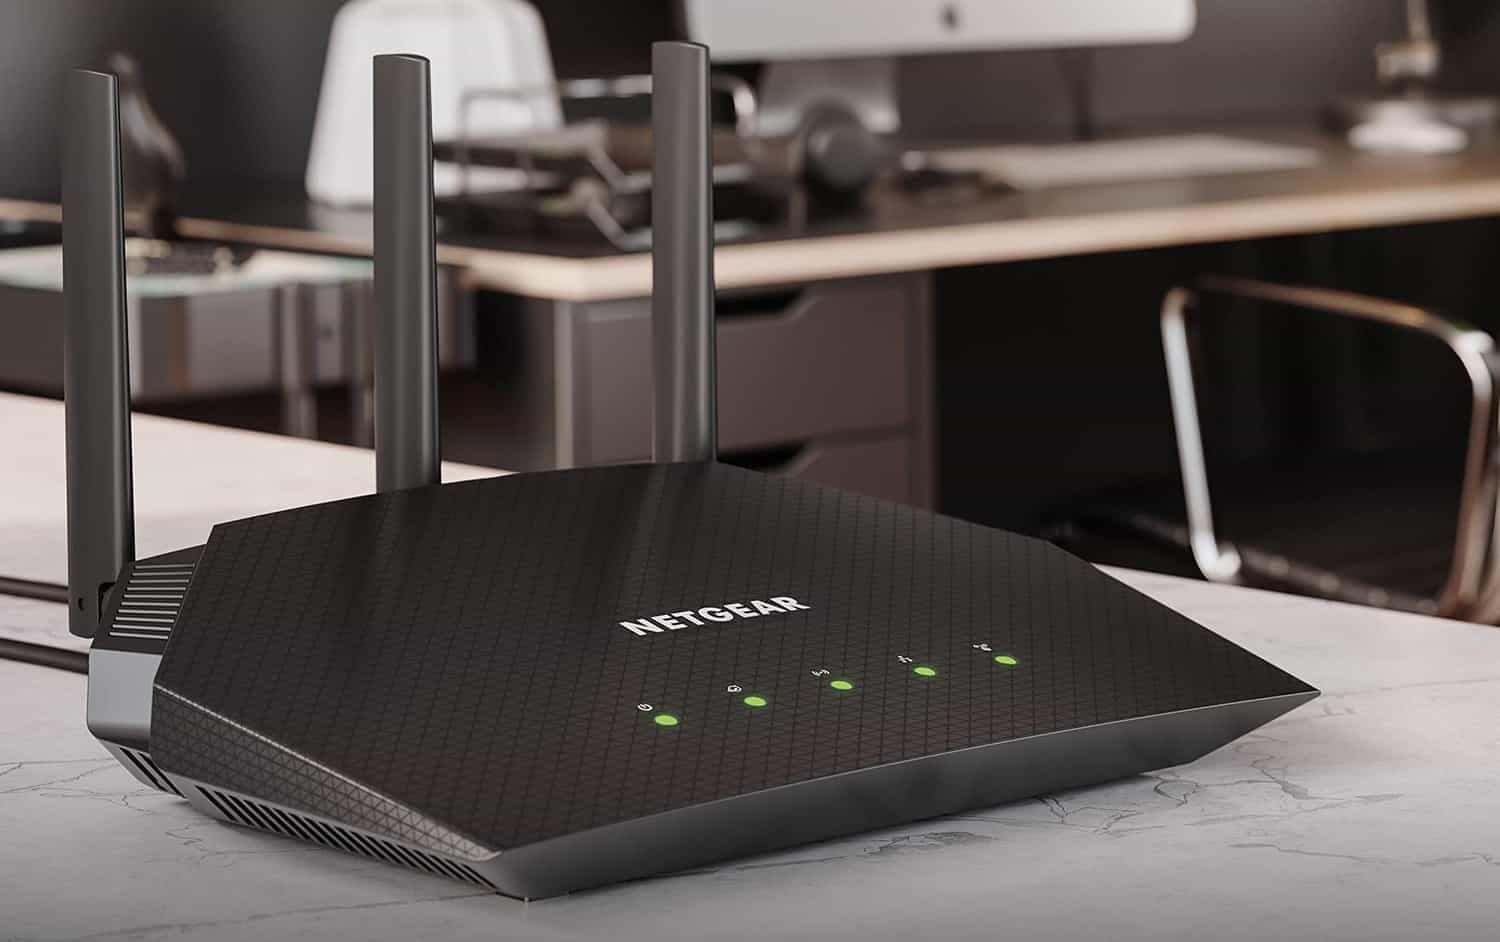 The Best WiFi 6 Routers In 2022 <-- 6 Best Routers For 802.11 AX Reviews